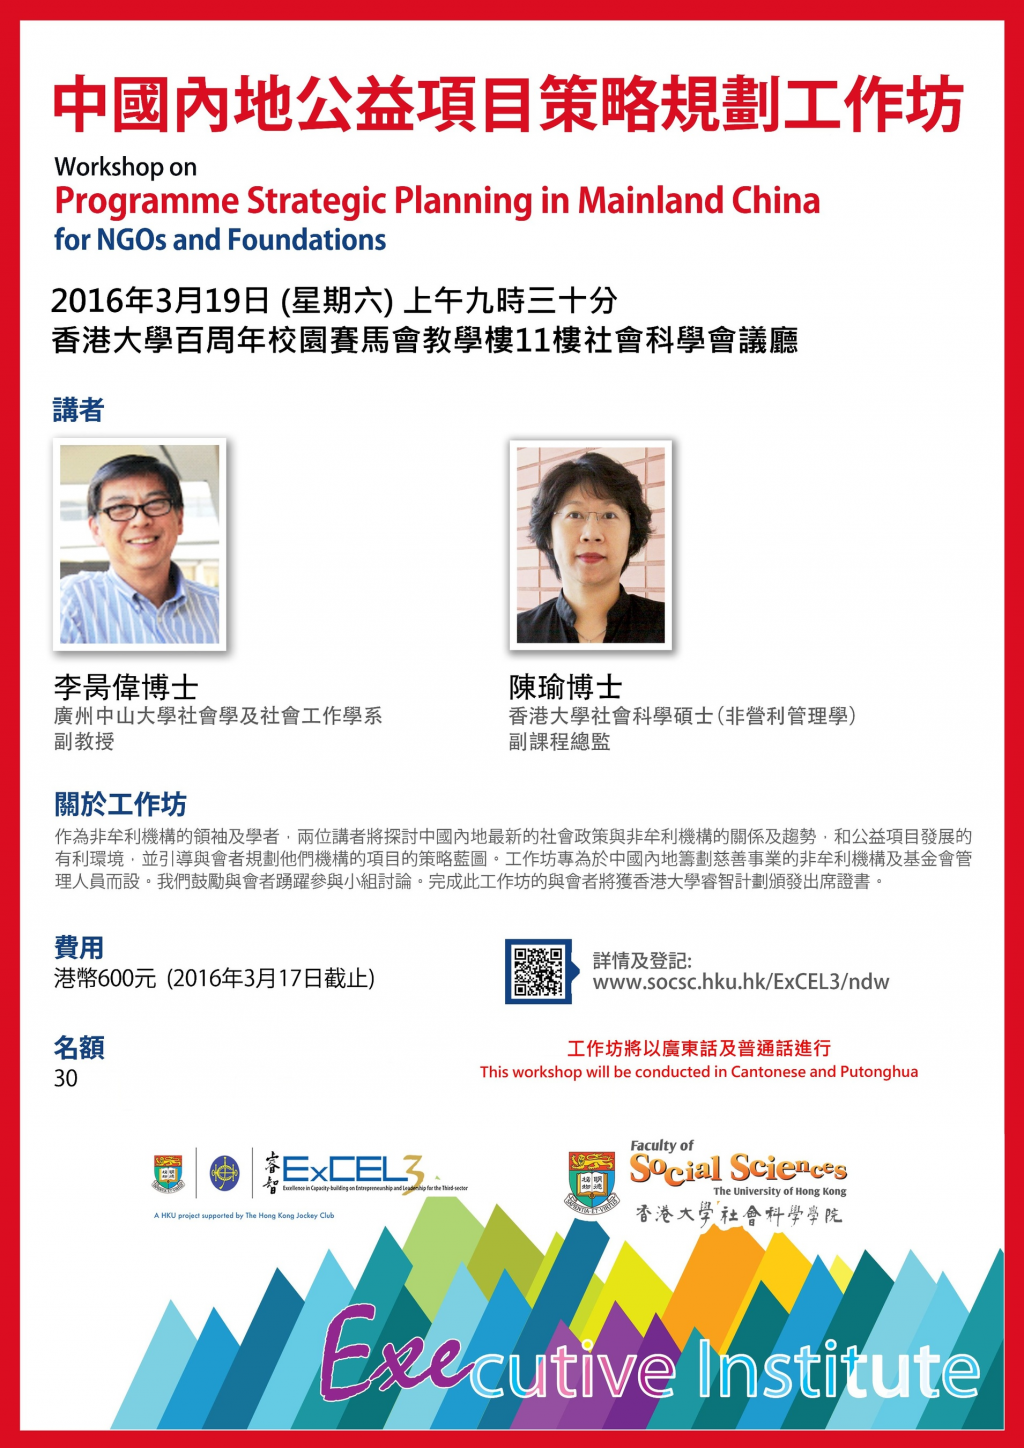 Workshop on Programme Strategic Planning in Mainland China for NGOs and Foundations